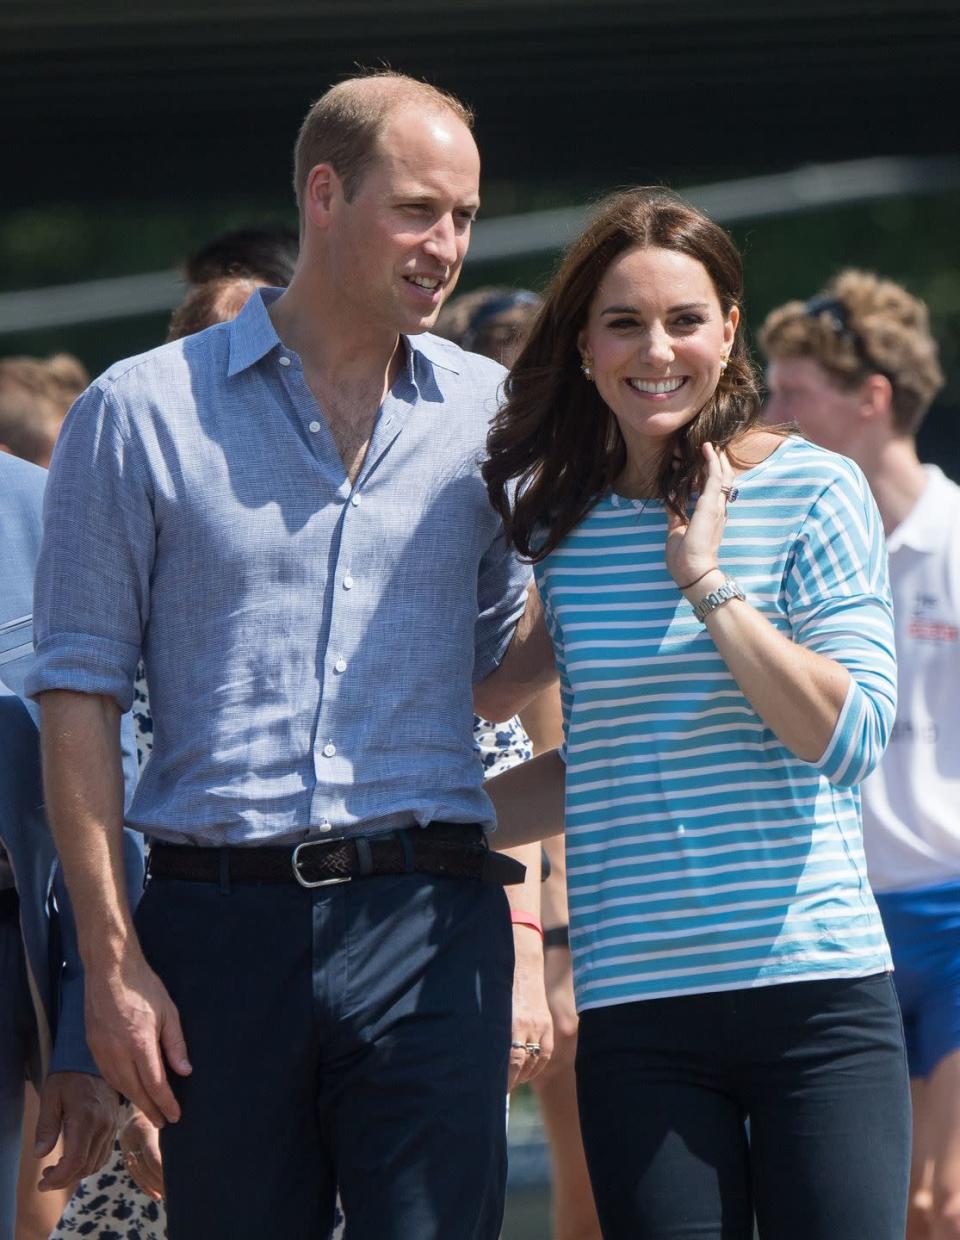 <p>The Duke and Duchess of Cambridge wrapped their arms around each other's waists after taking part in a rowing race between the twinned town of Cambridge and Heidelberg during their official visit to Poland and Germany, July 2017. </p>